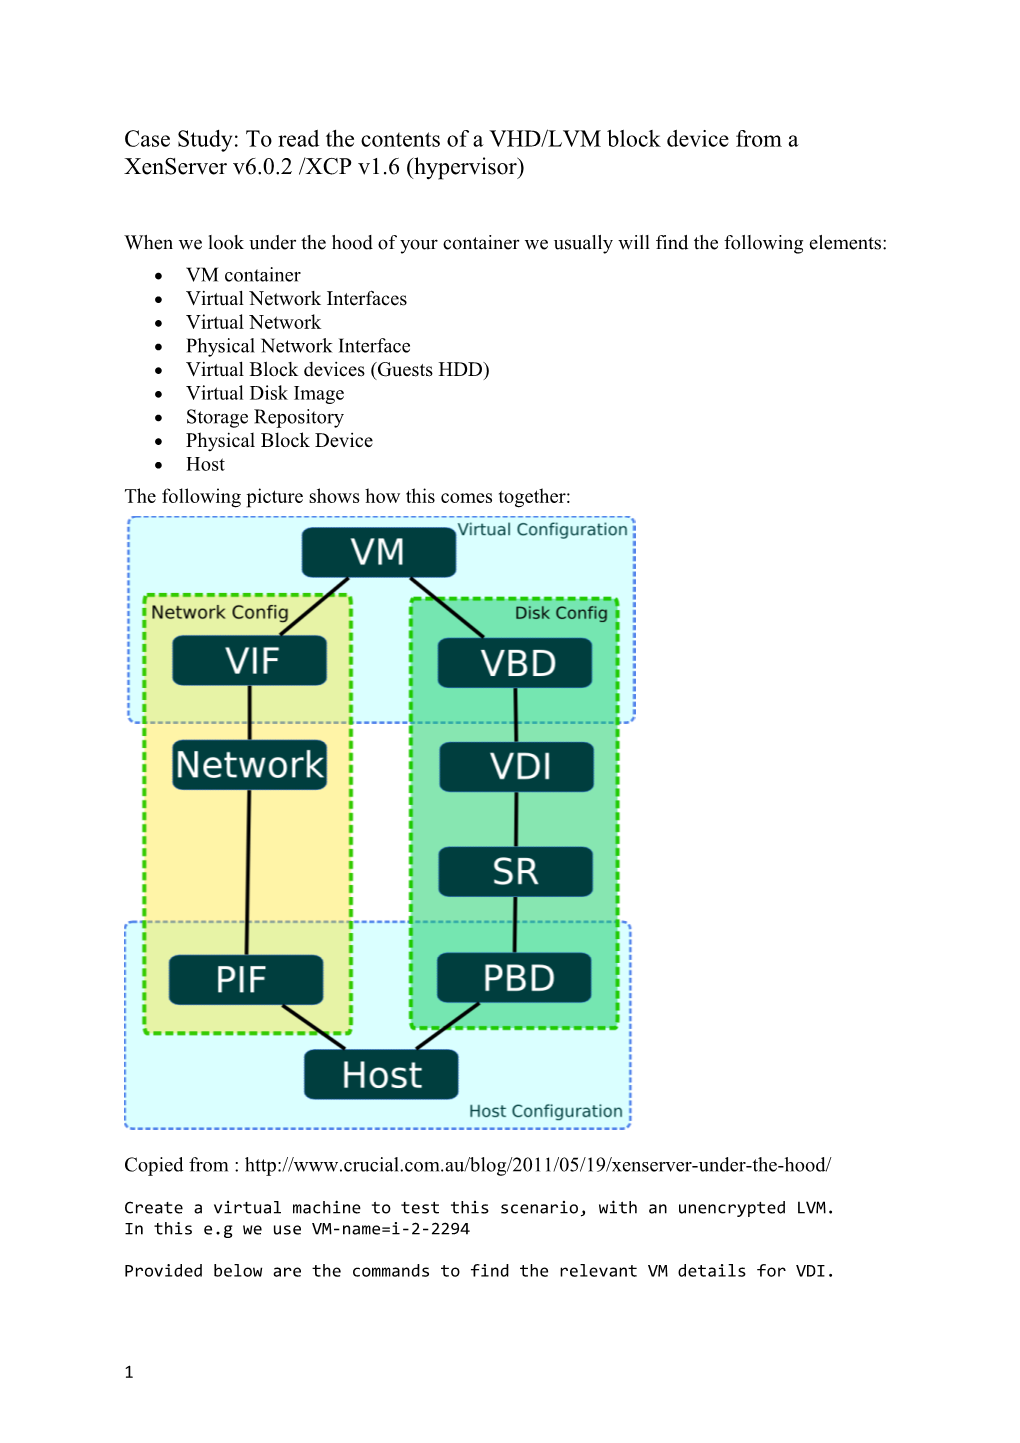 Case Study: to Read the Contents of a VHD/LVM Block Device from a Xenserver V6.0.2 /XCP